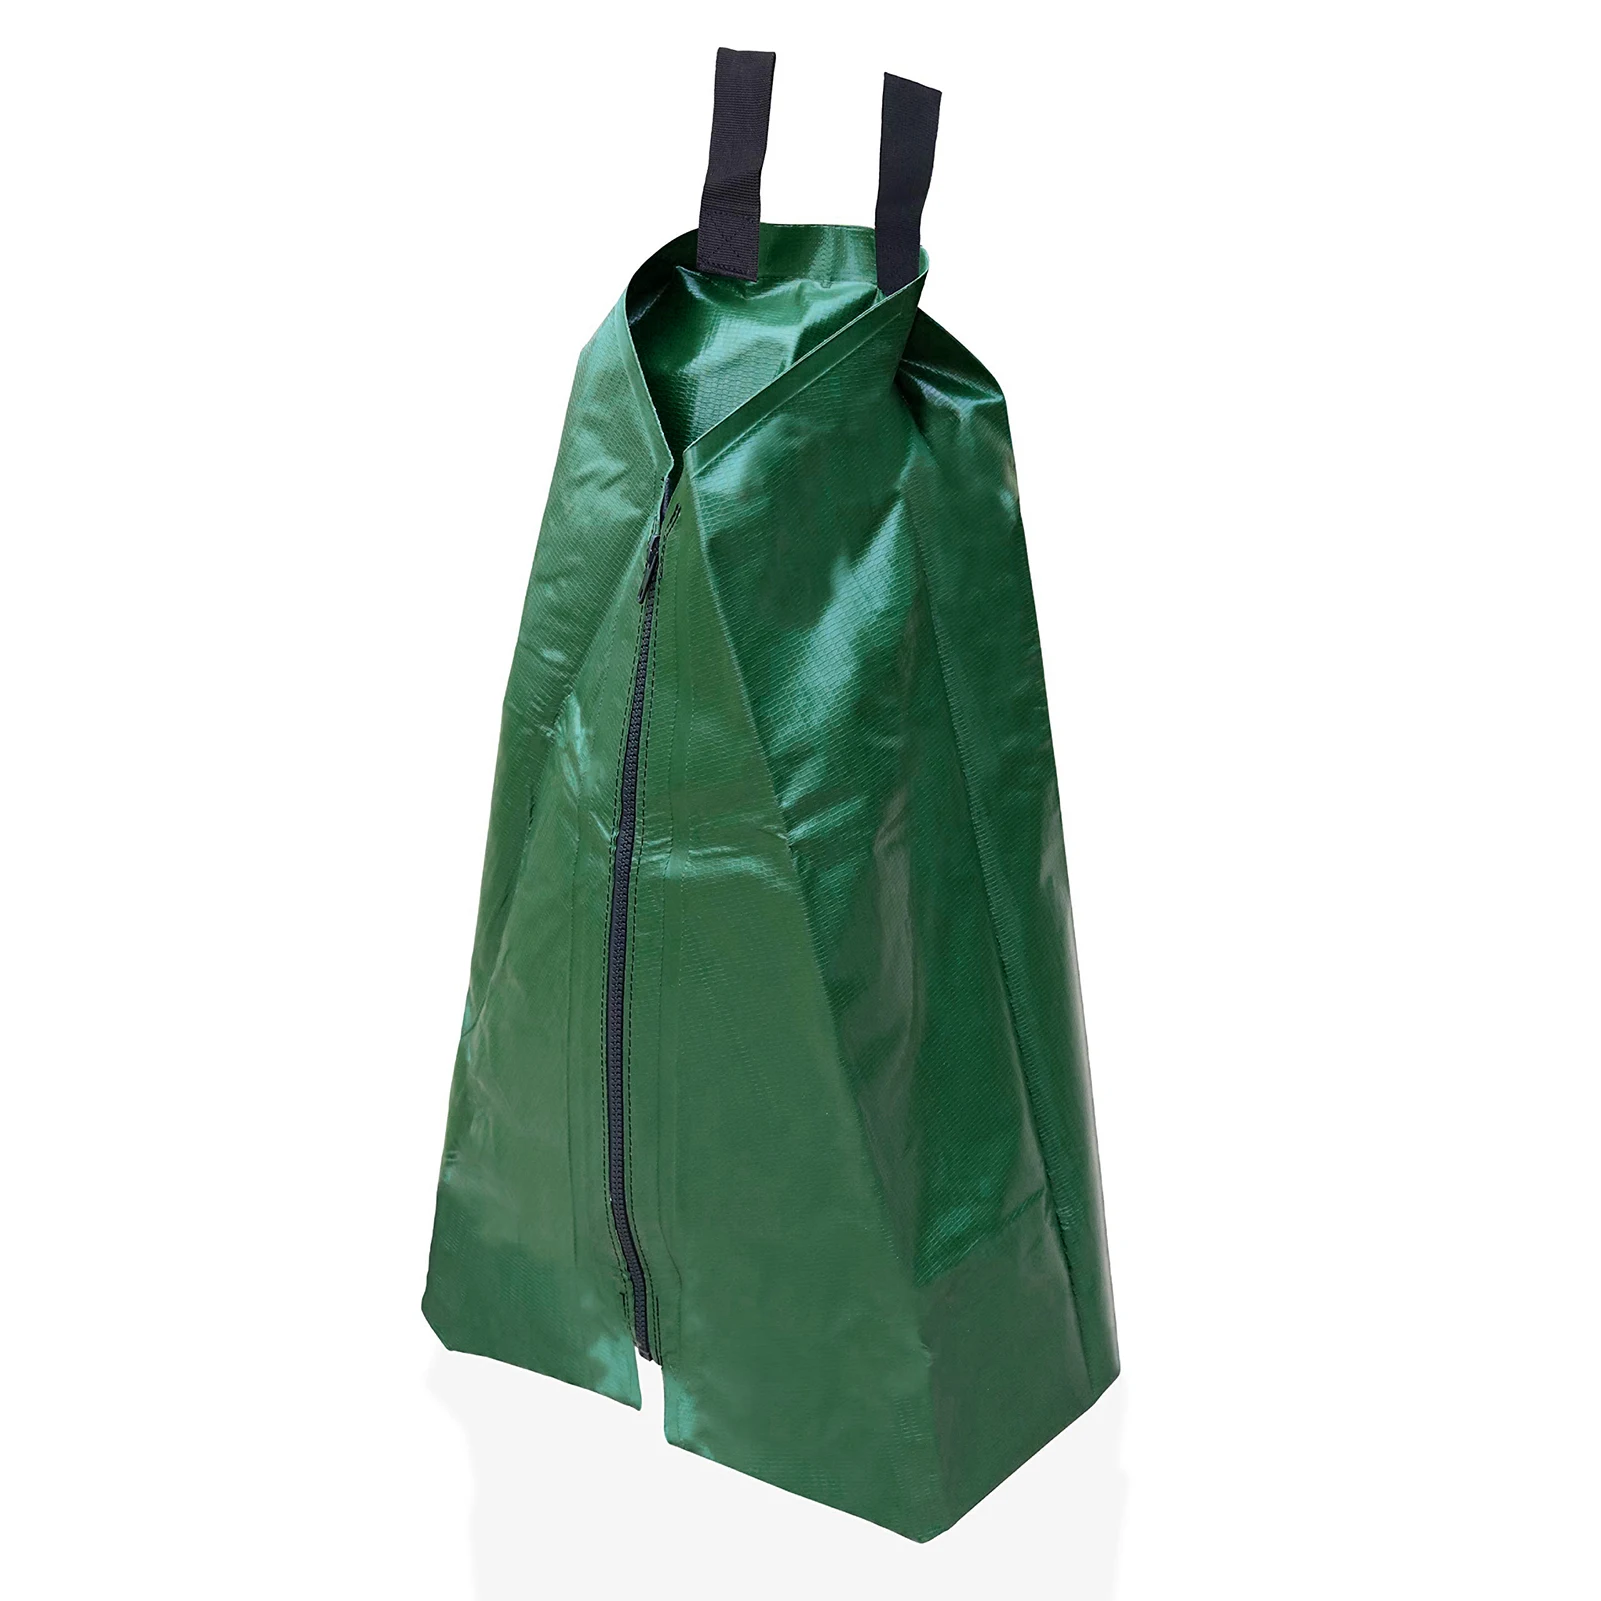 

20 Gallon Slow Release Tree Watering Bag 20 Gallon Slow Release Water Pouches with Durable PVC Plants Automatic Drip System